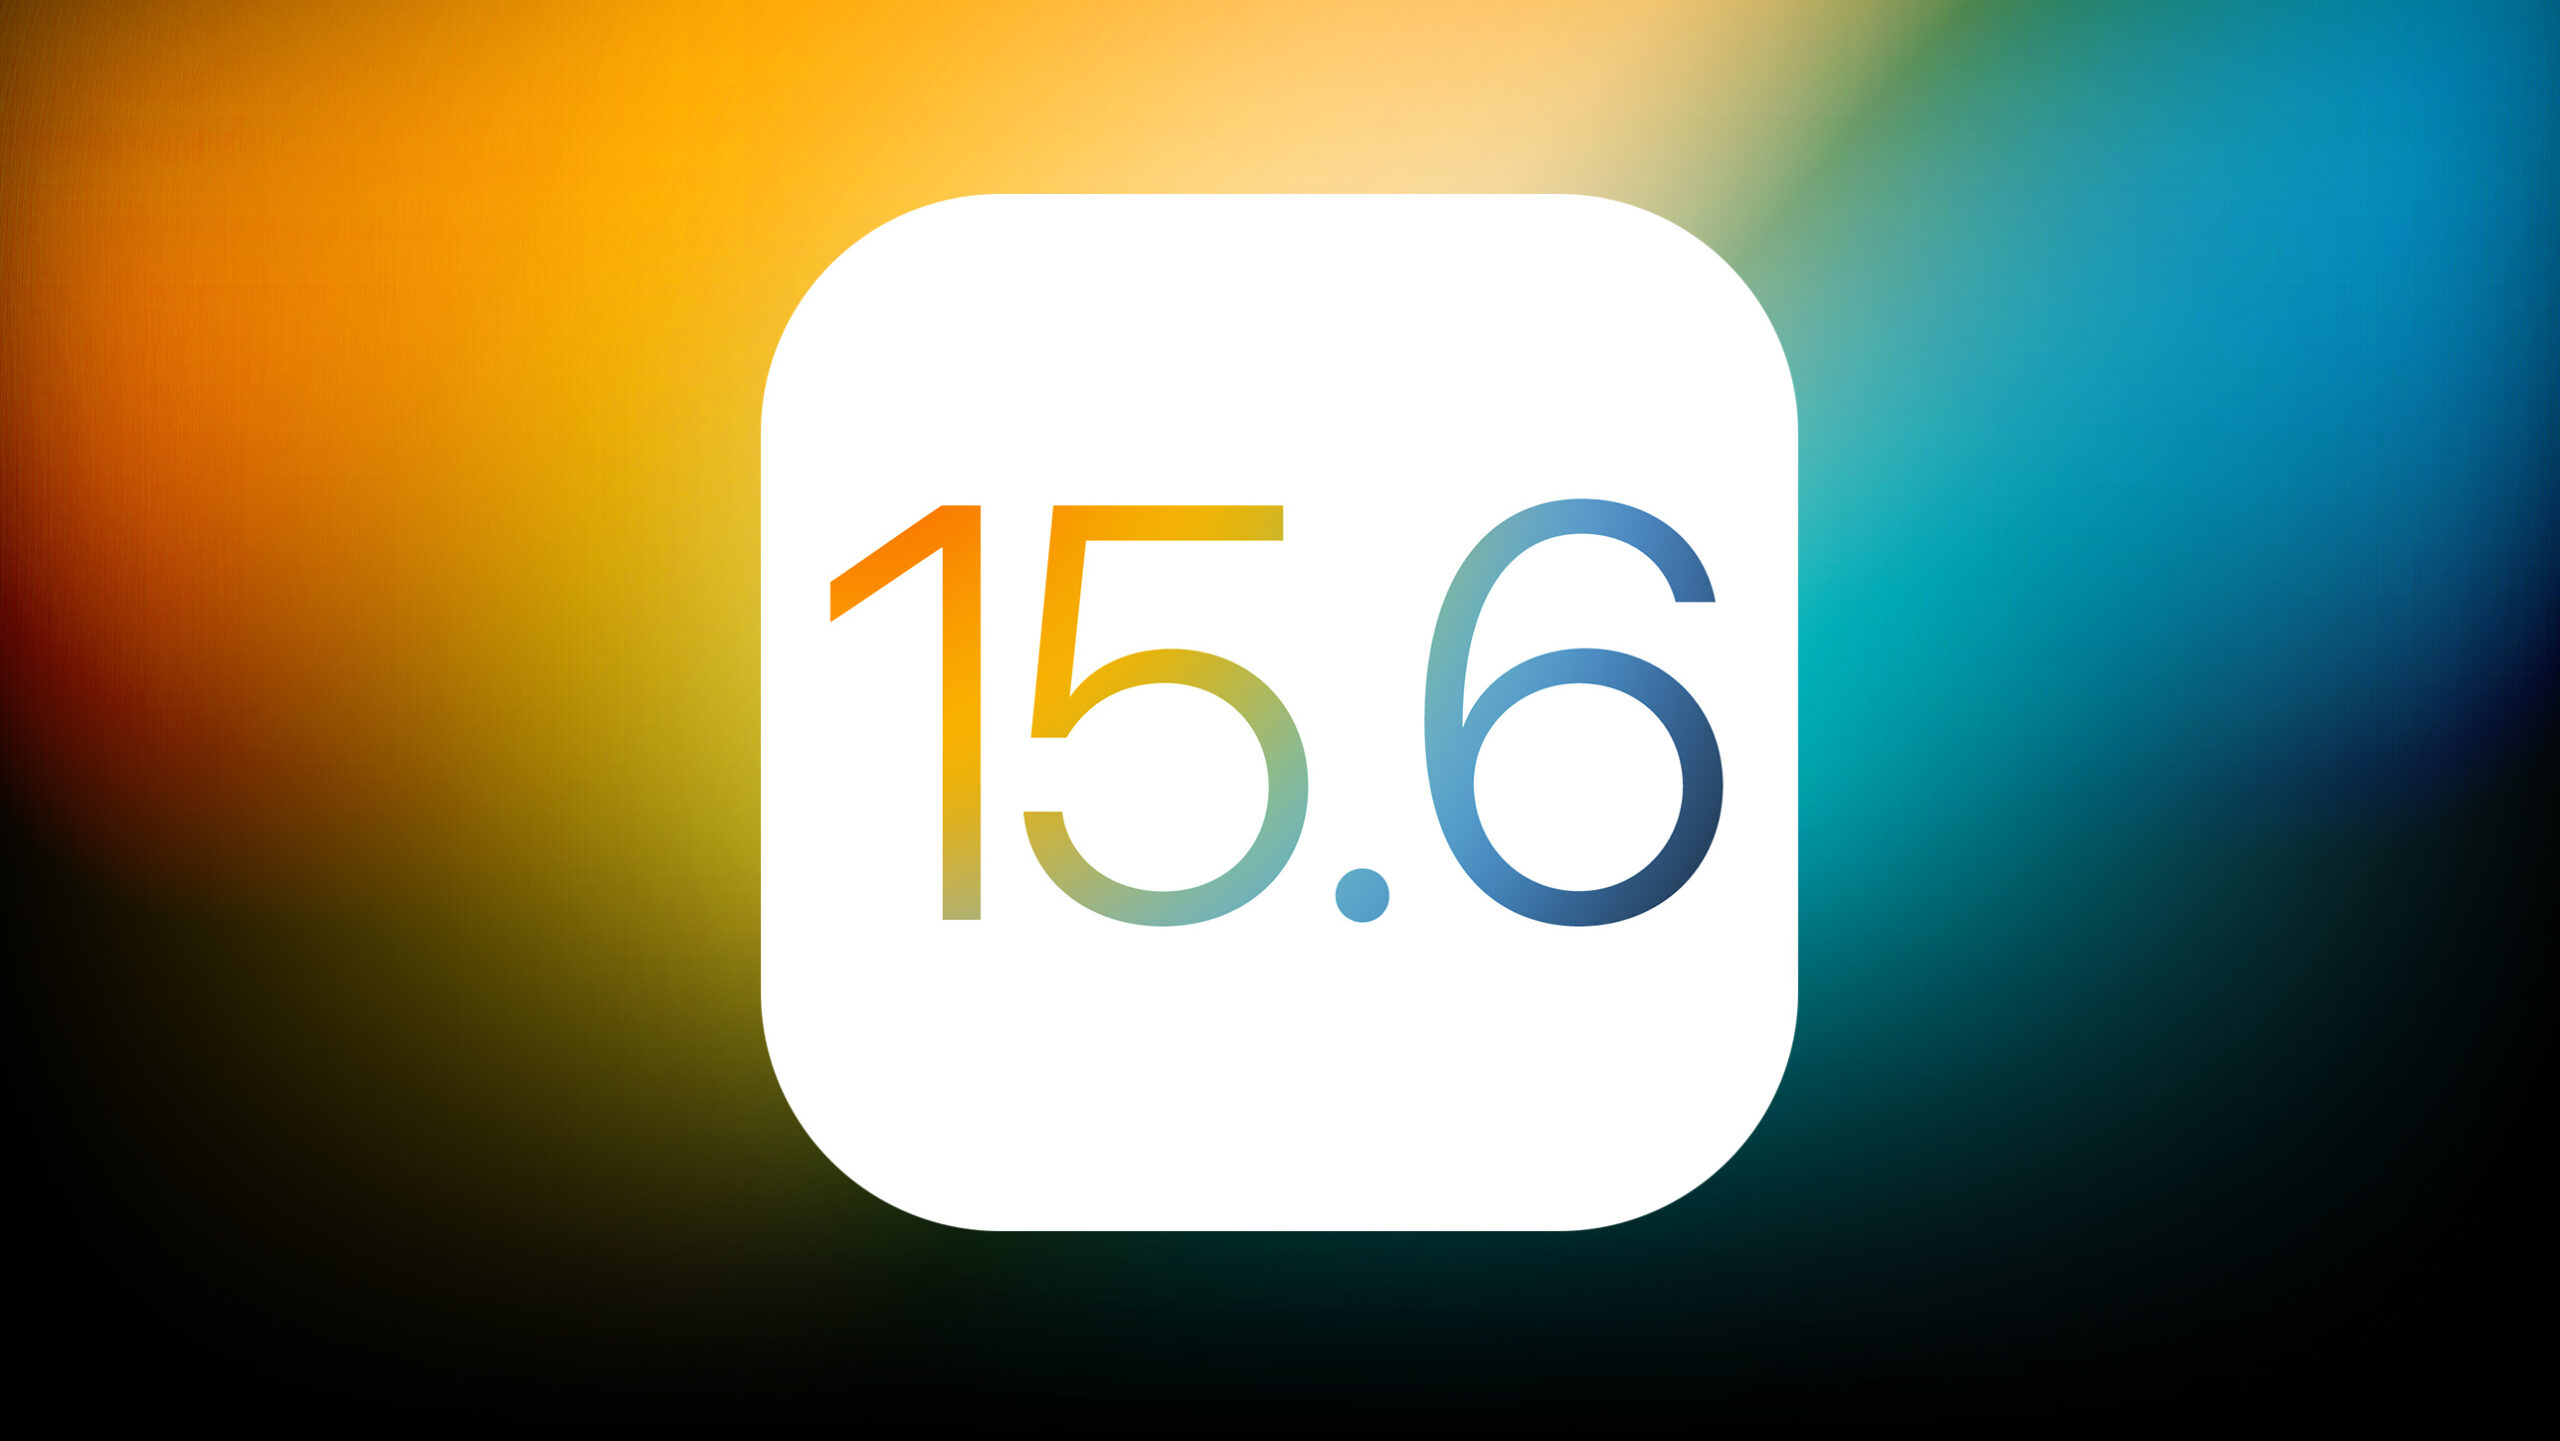 Apple Releases iOS 15.6 With New Live Sports Features, Storage Bug Fix and More